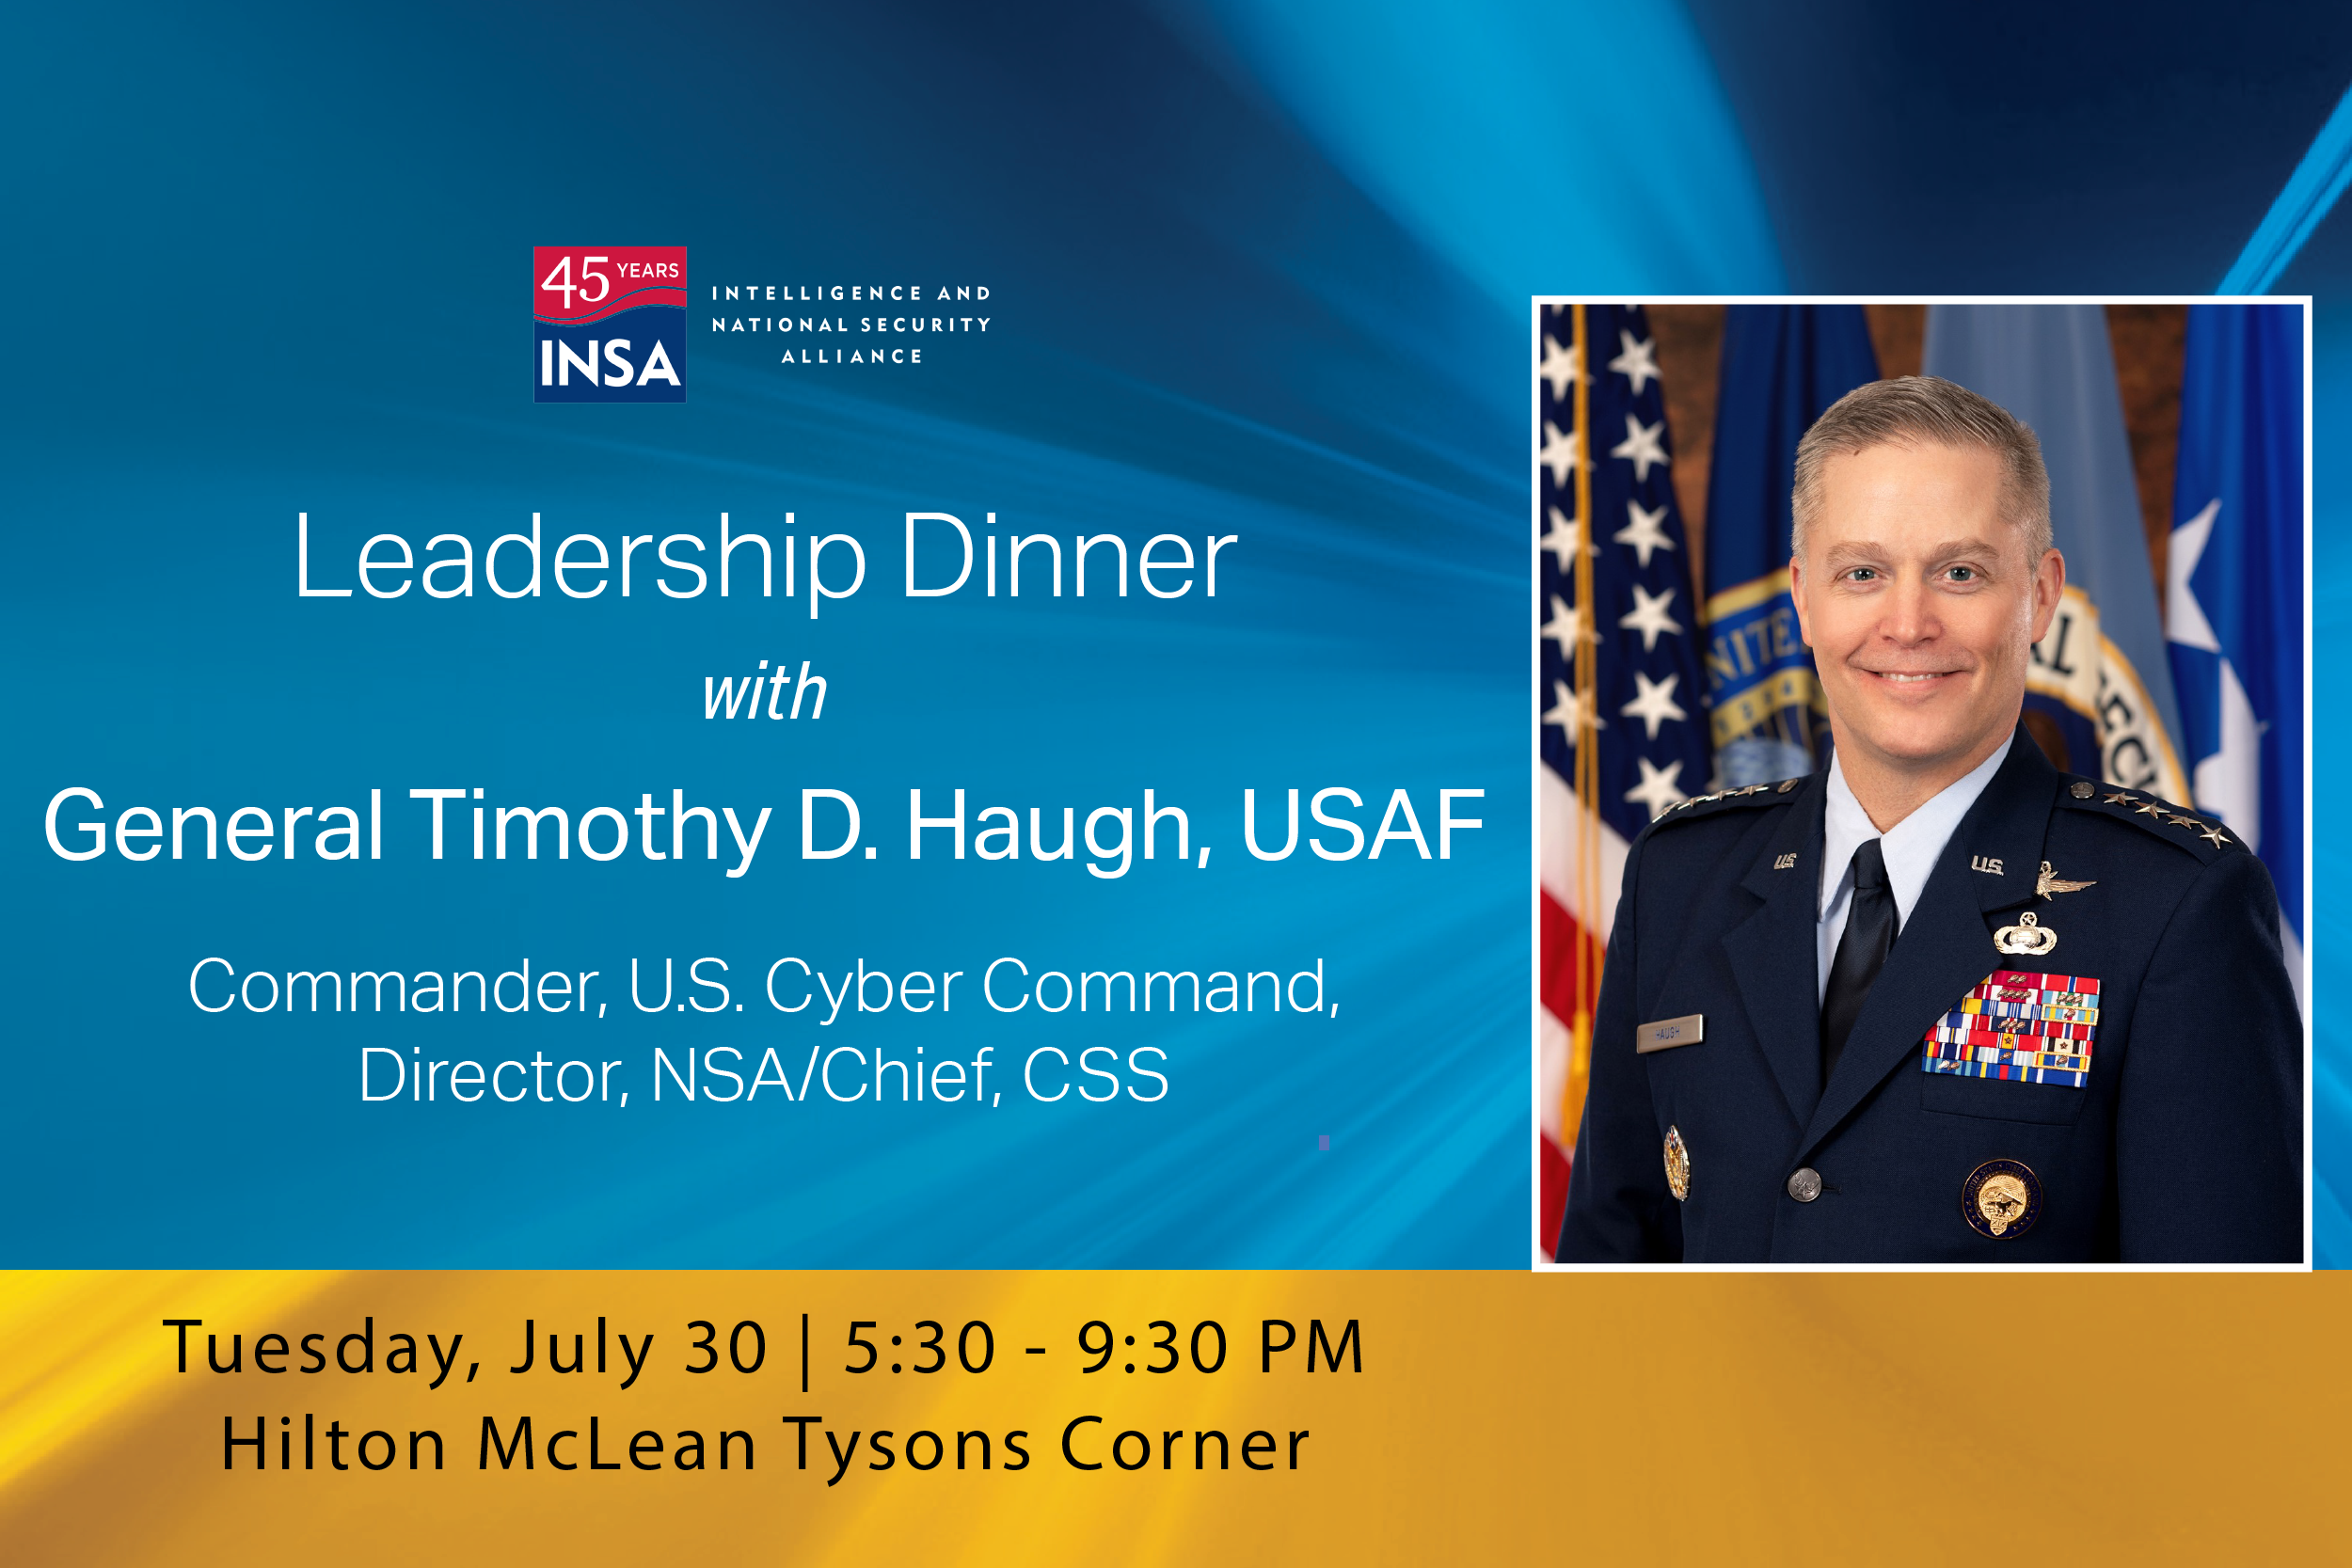 INSA is hosting a Leadership Dinner with General Timothy D. Haugh, USAF, Commander, CYBERCOM, Director, NSA/Chief, CSS